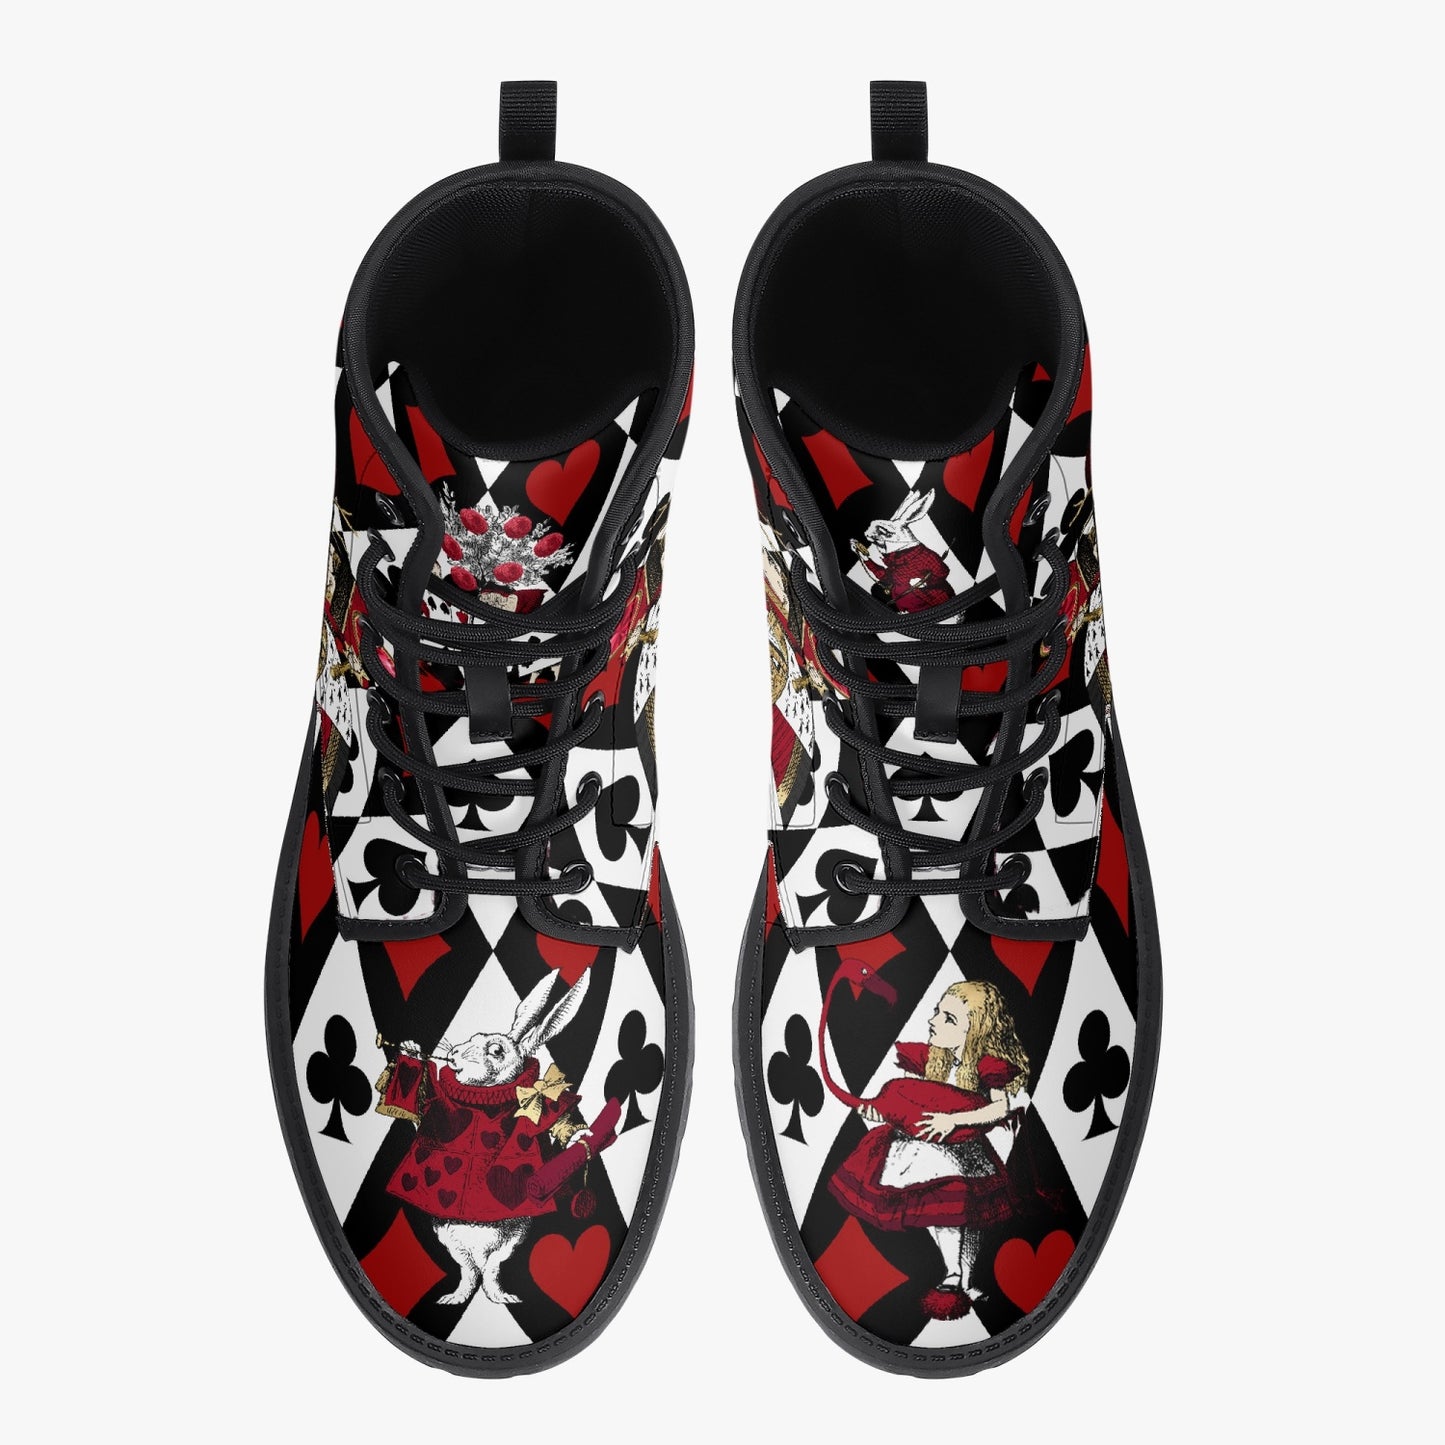 Alice in Wonderland Queen of Hearts Vegan Leather Combat Boots - Through the Looking Glass Gothic Boots (JPREG102)